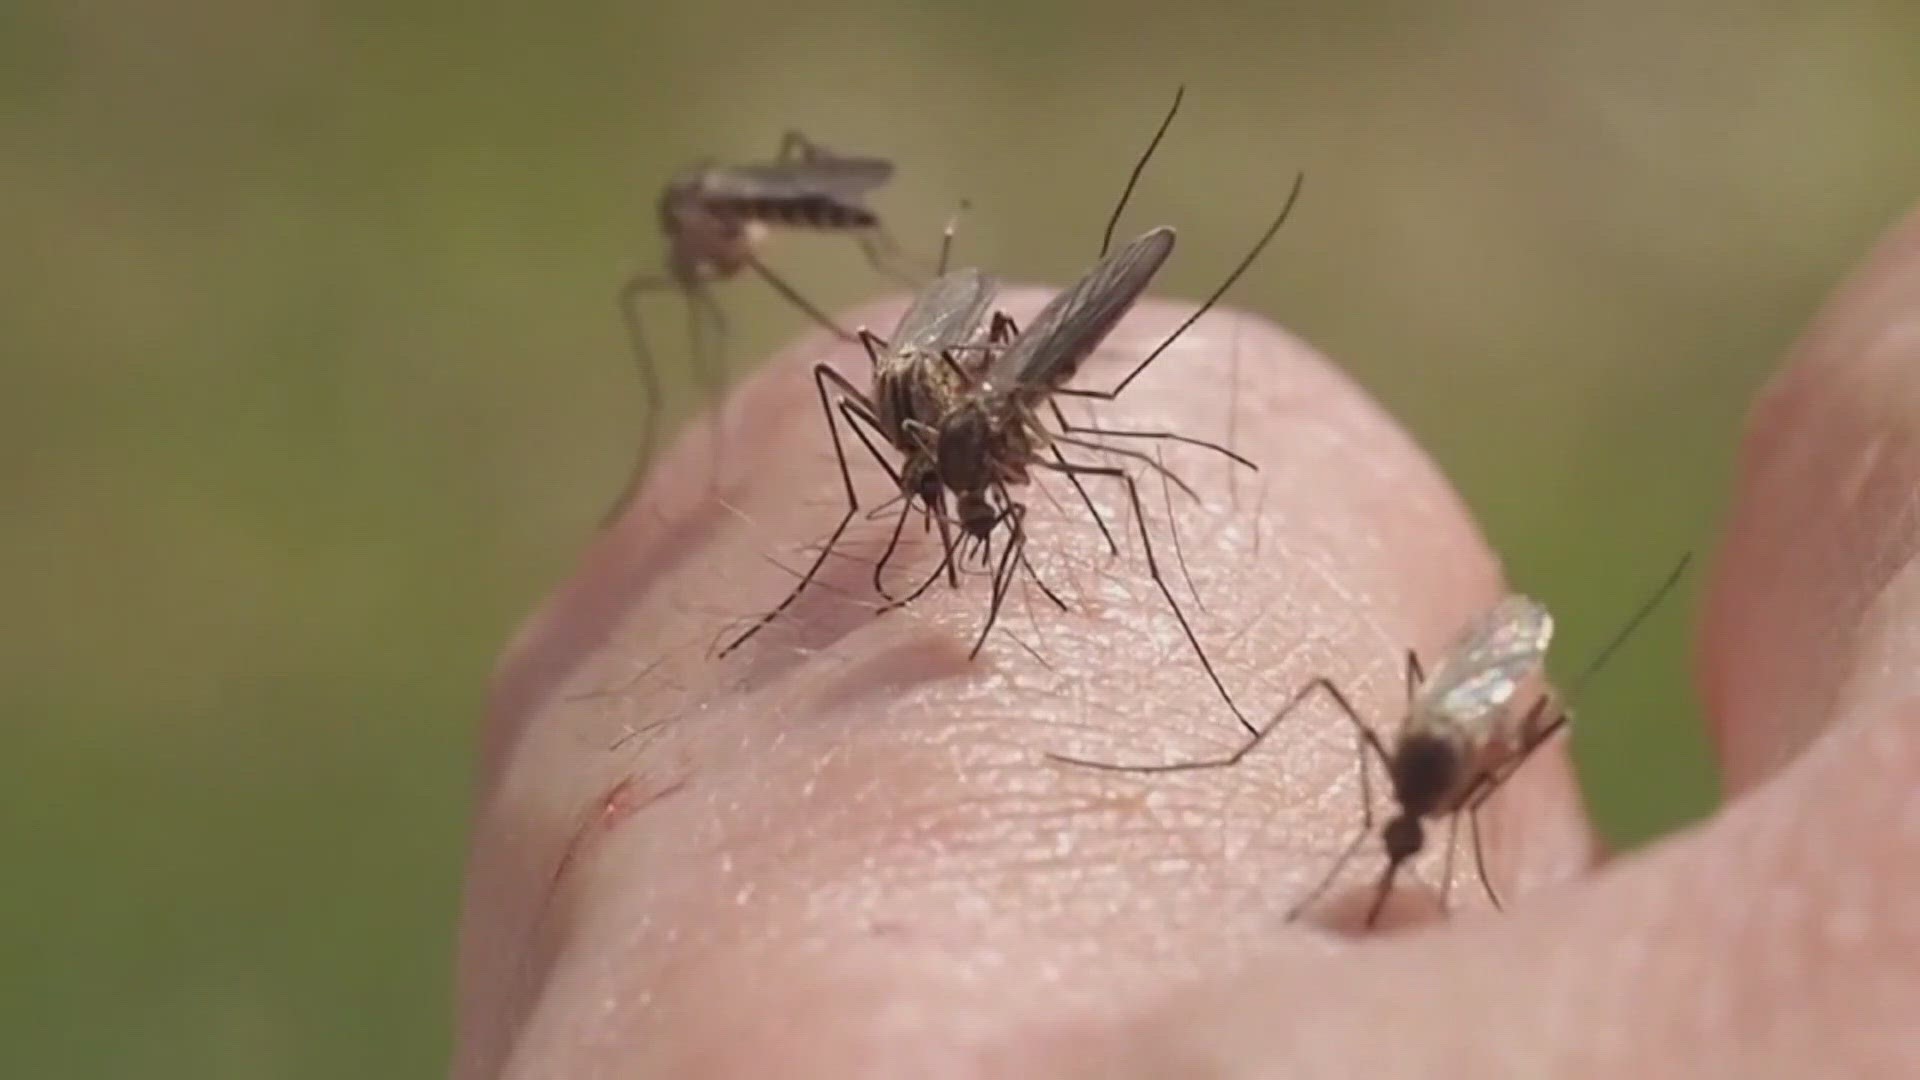 The CDC says Colorado had the worst West Nile virus outbreak in the U.S. last year with more than 600 infections and 50 deaths.